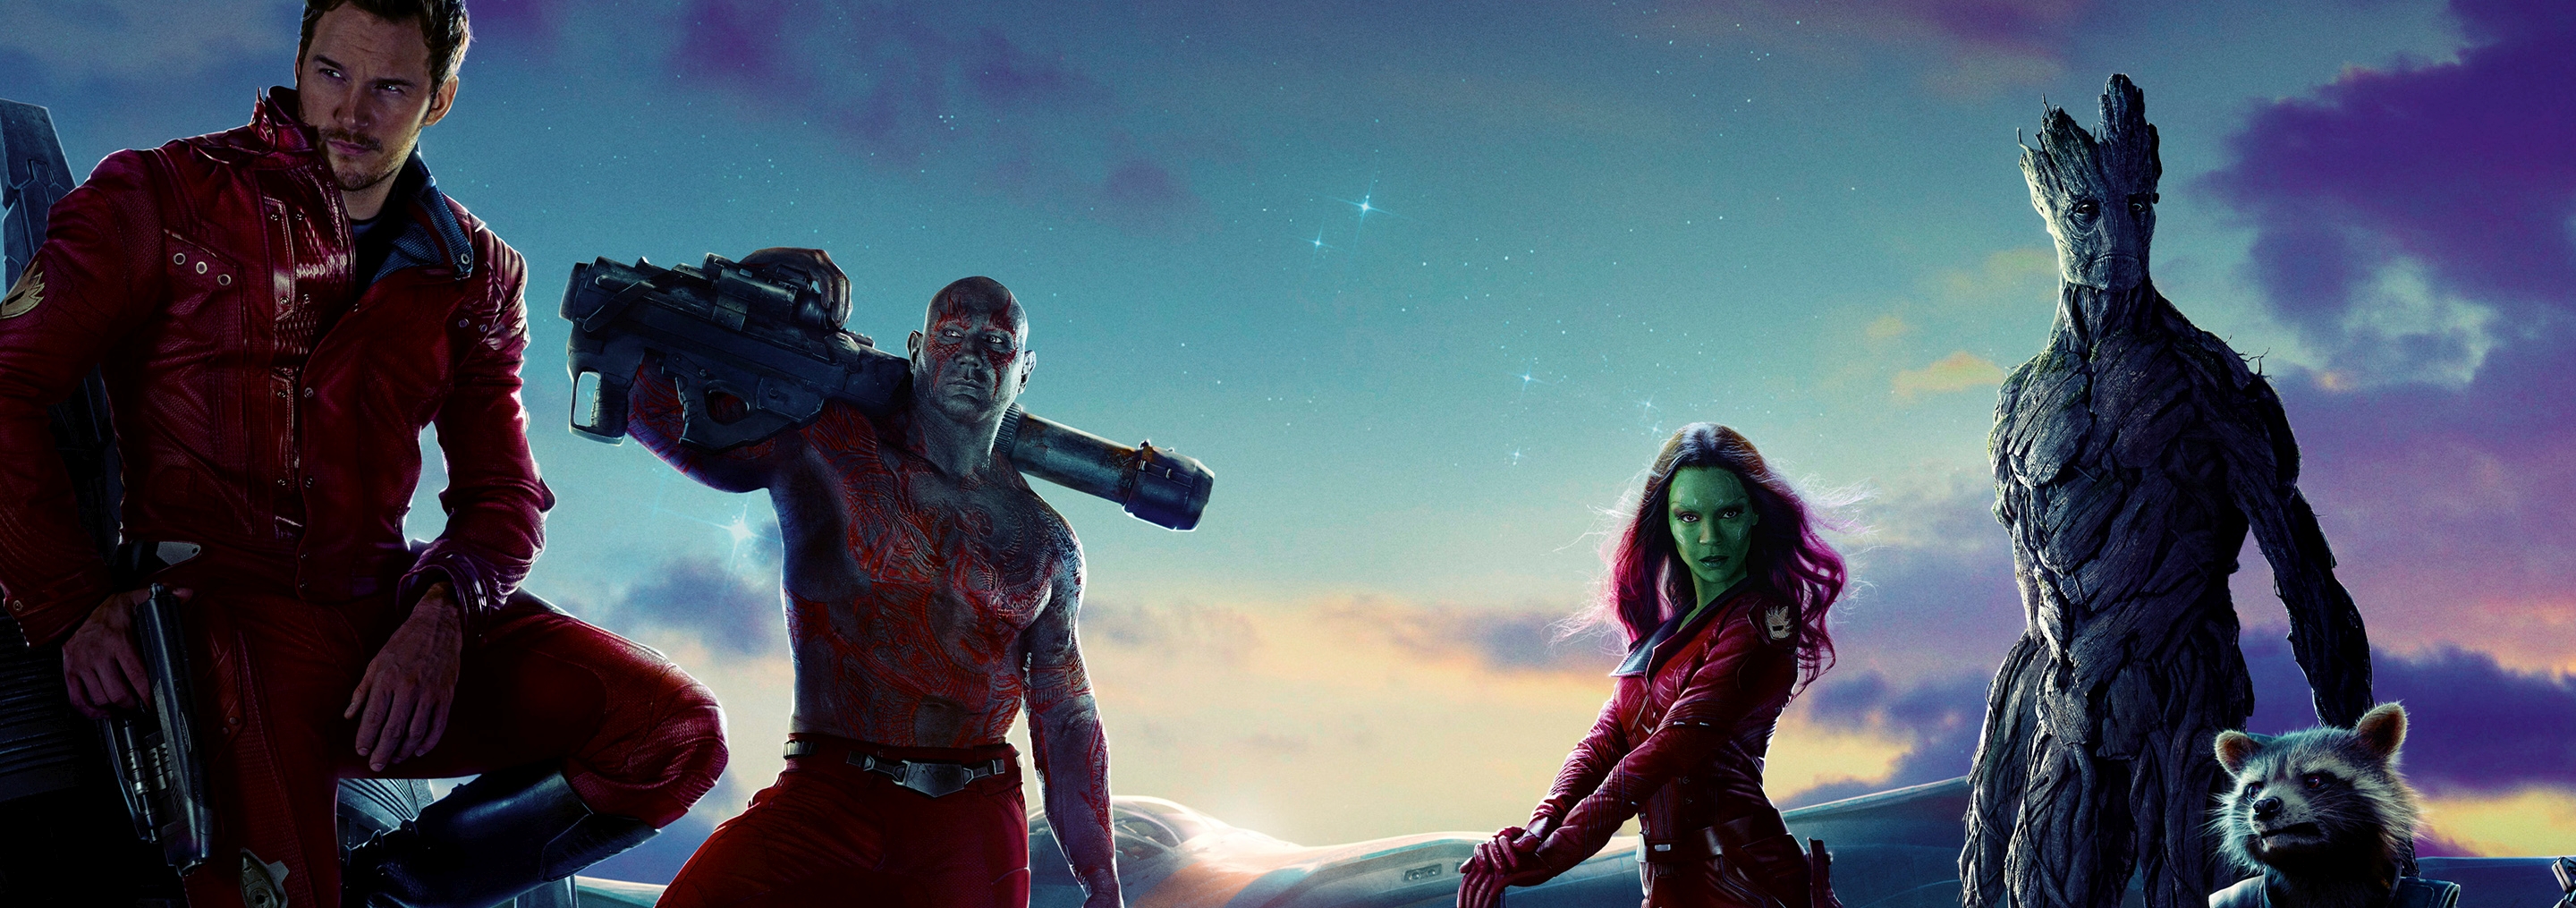 The Guardians of the Galaxy Blu-ray Steelbook artwork from Zavvi has been released!